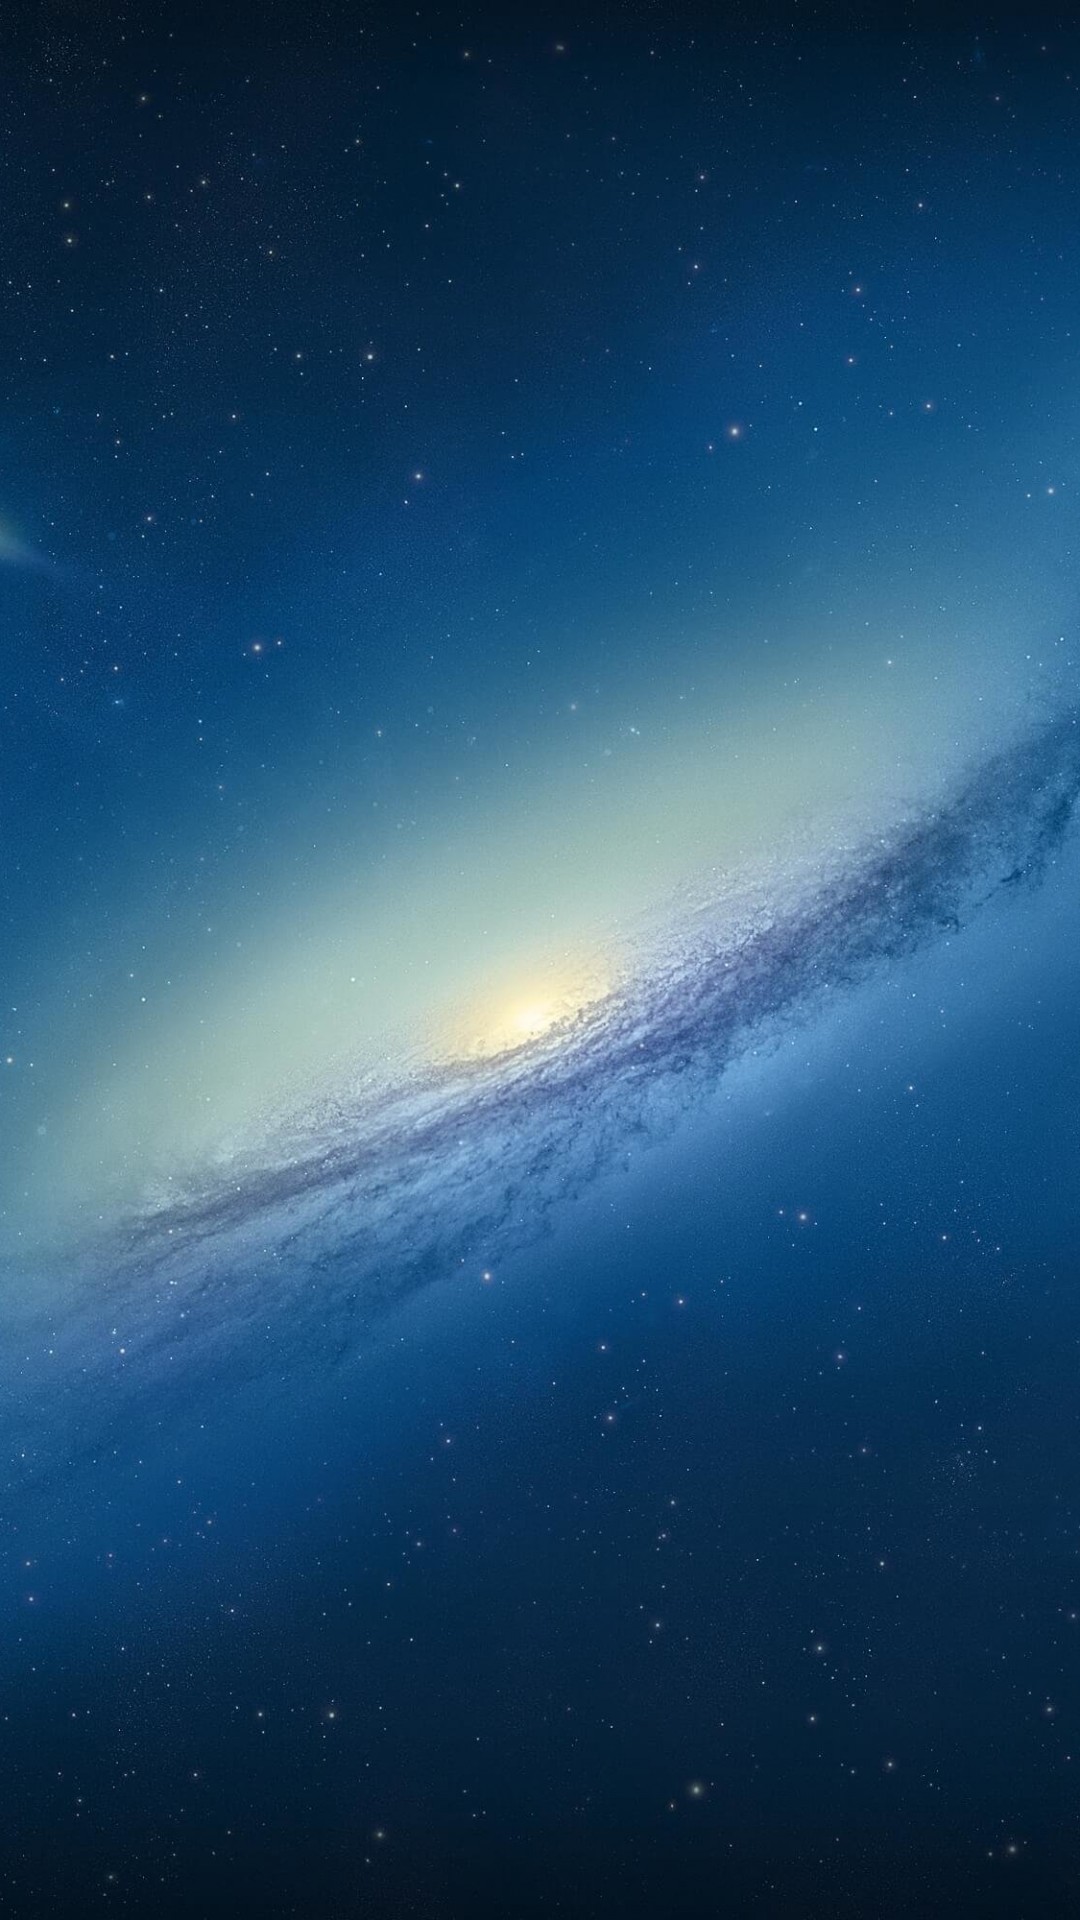 Galaxy NGC 3190 Wallpaper for SONY Xperia Z3